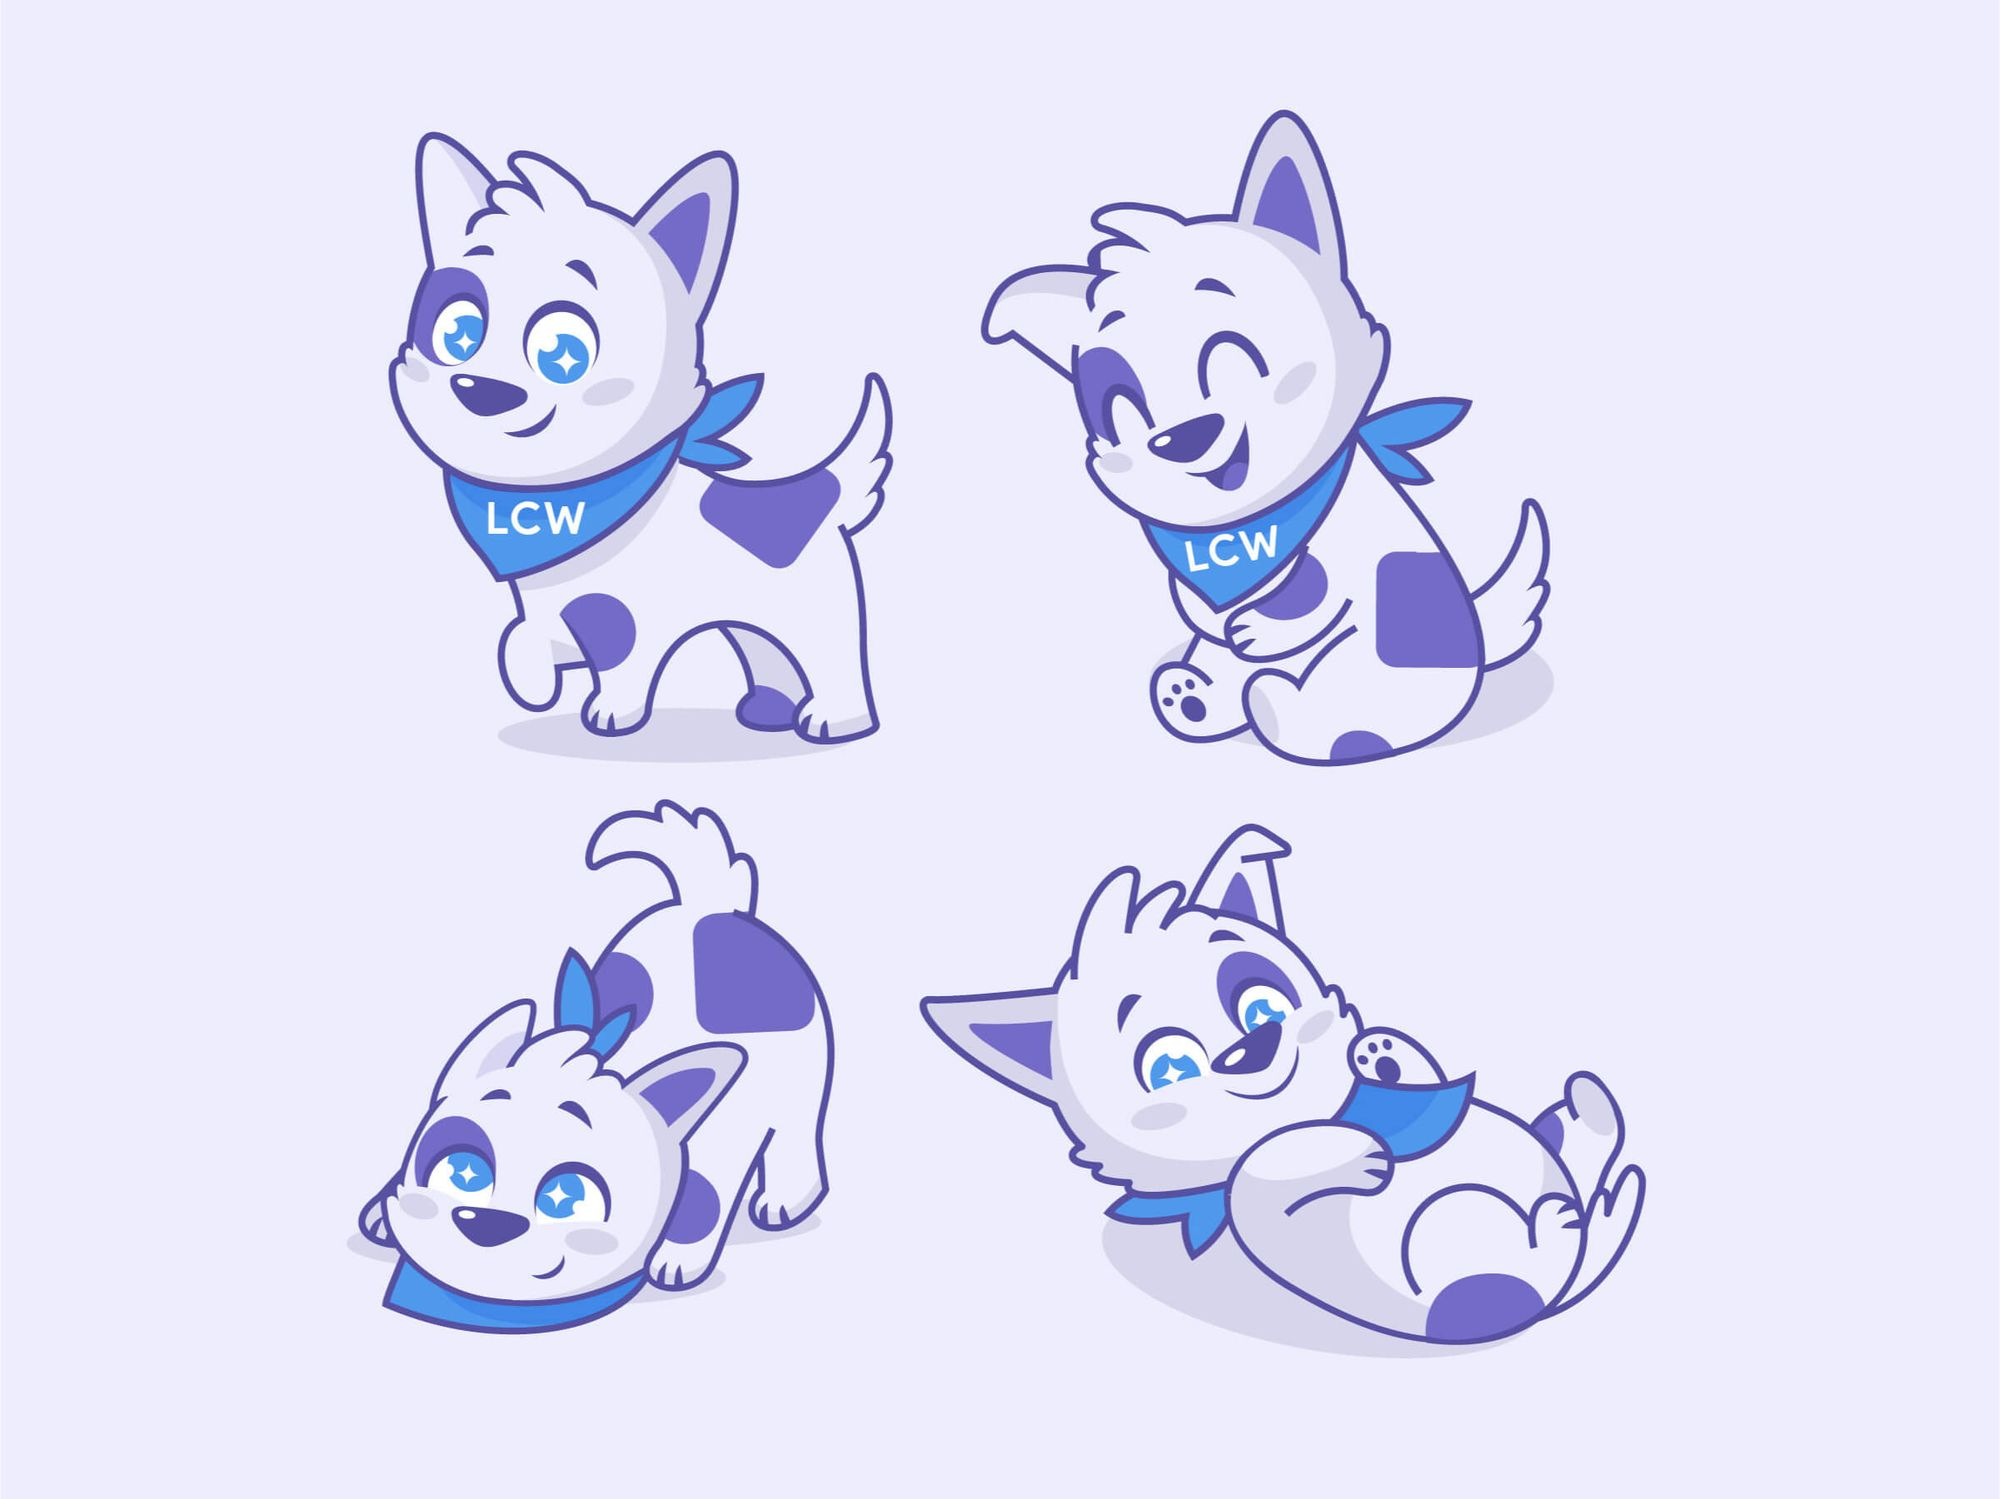 Finished drawings of mascot in four poses include standing, lying down, rolling over, and sitting